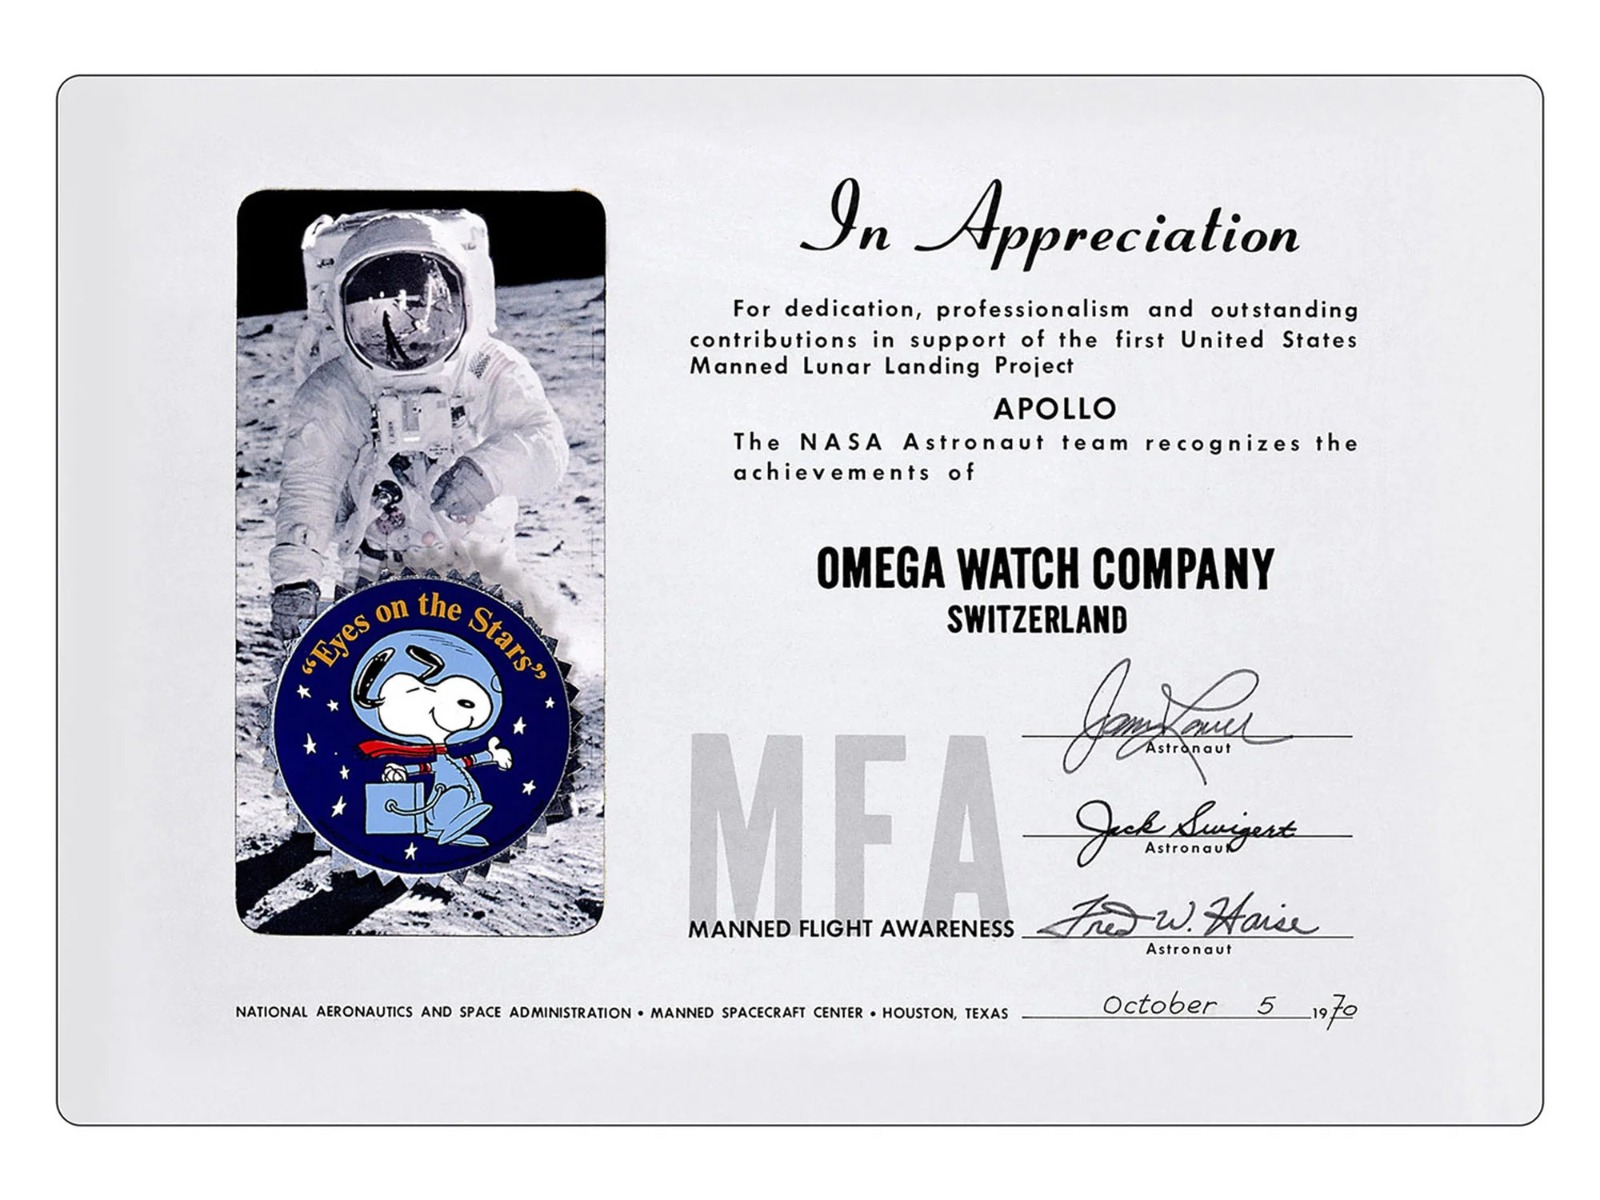 The Collaboration between Omega, NASA, and Snoopy: A Historic Journey